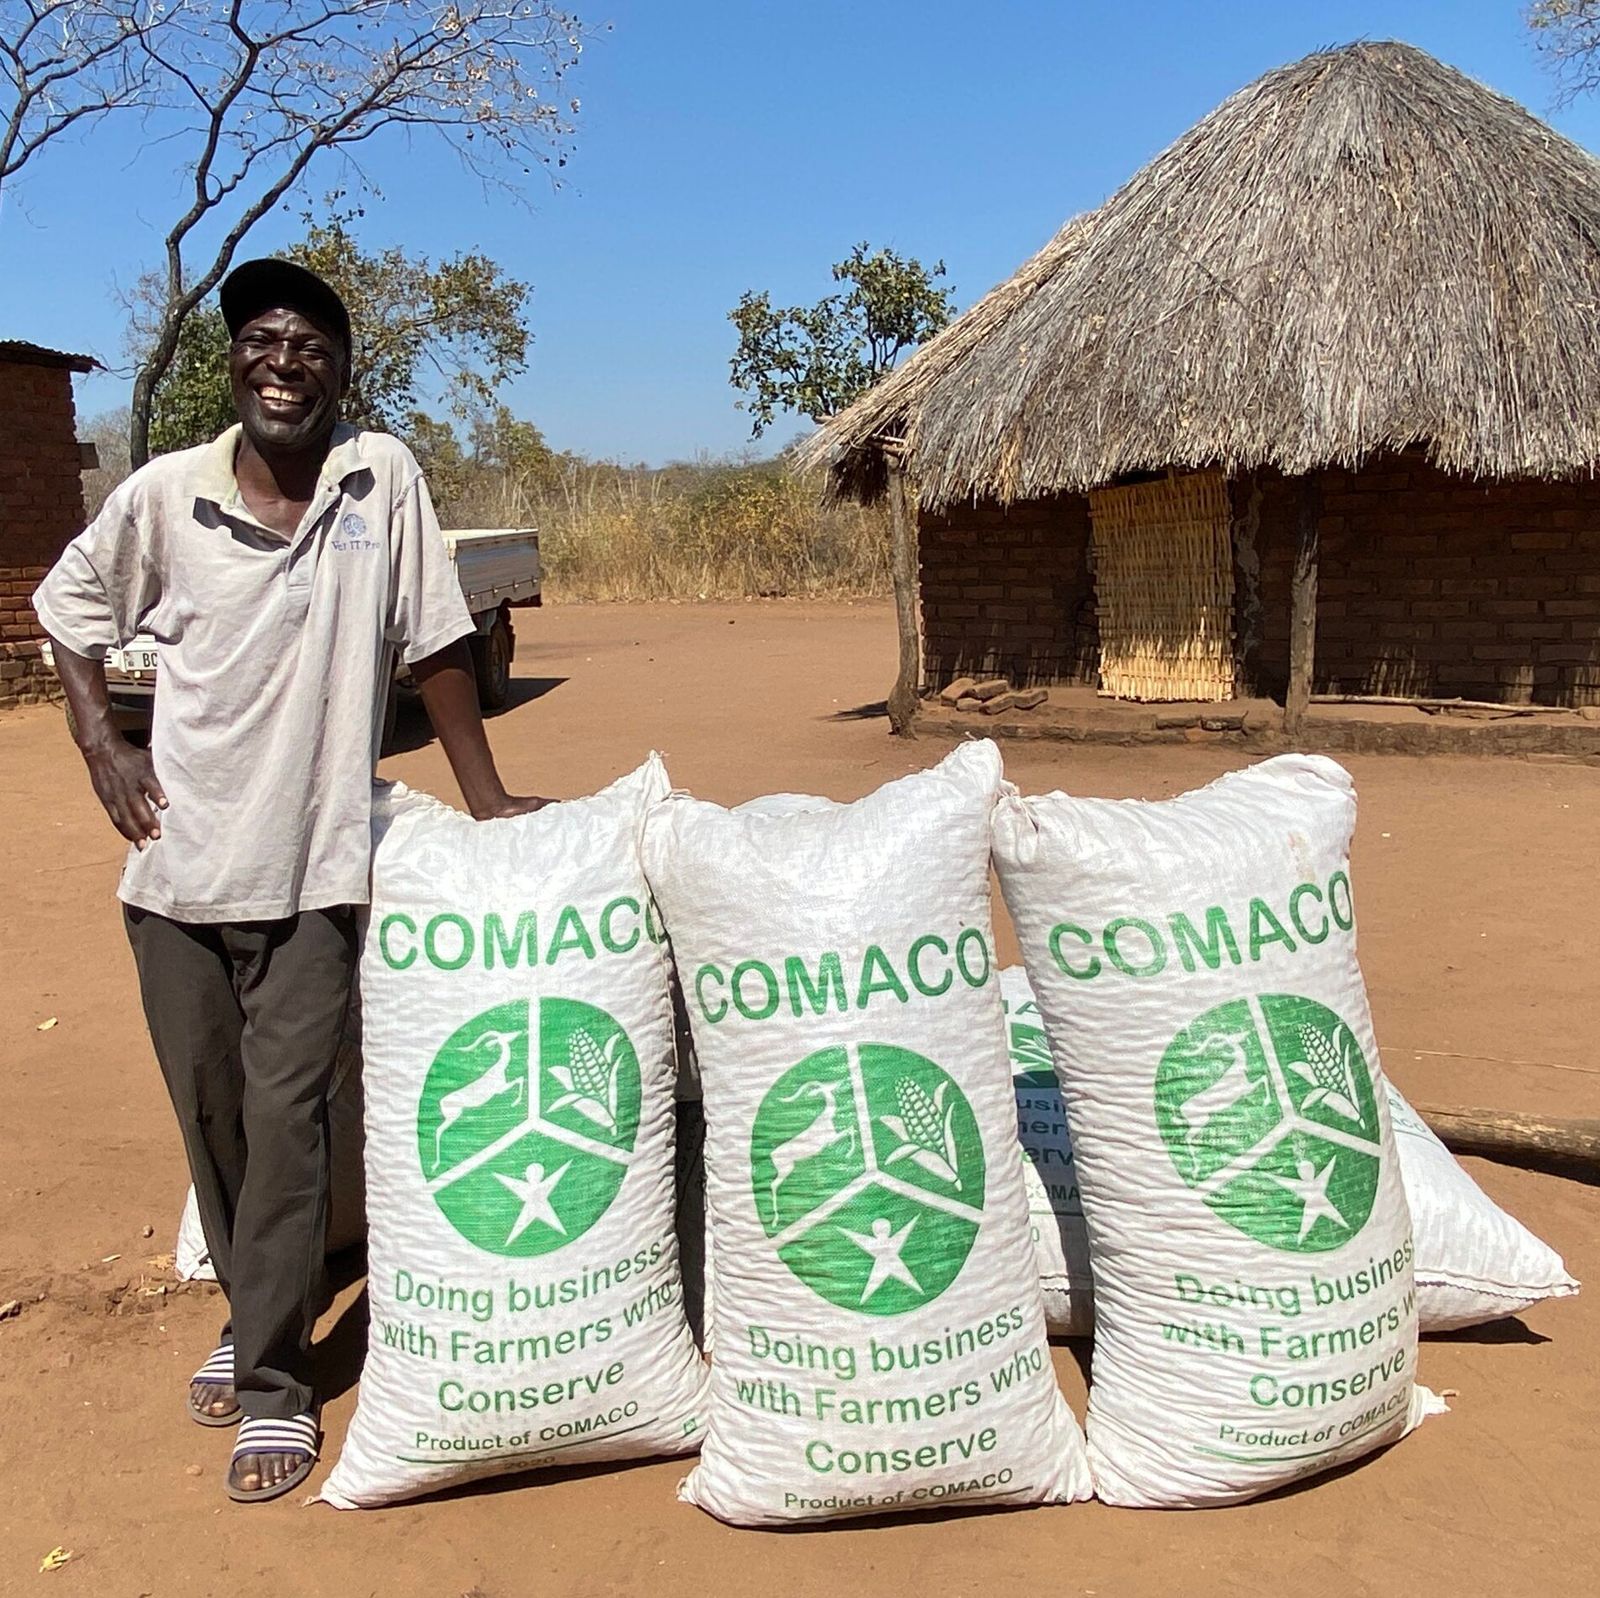 COMACO buys the harvests of more than 230,000 farming families in Zambia and creates incentives for the protection of land and wildlife. 